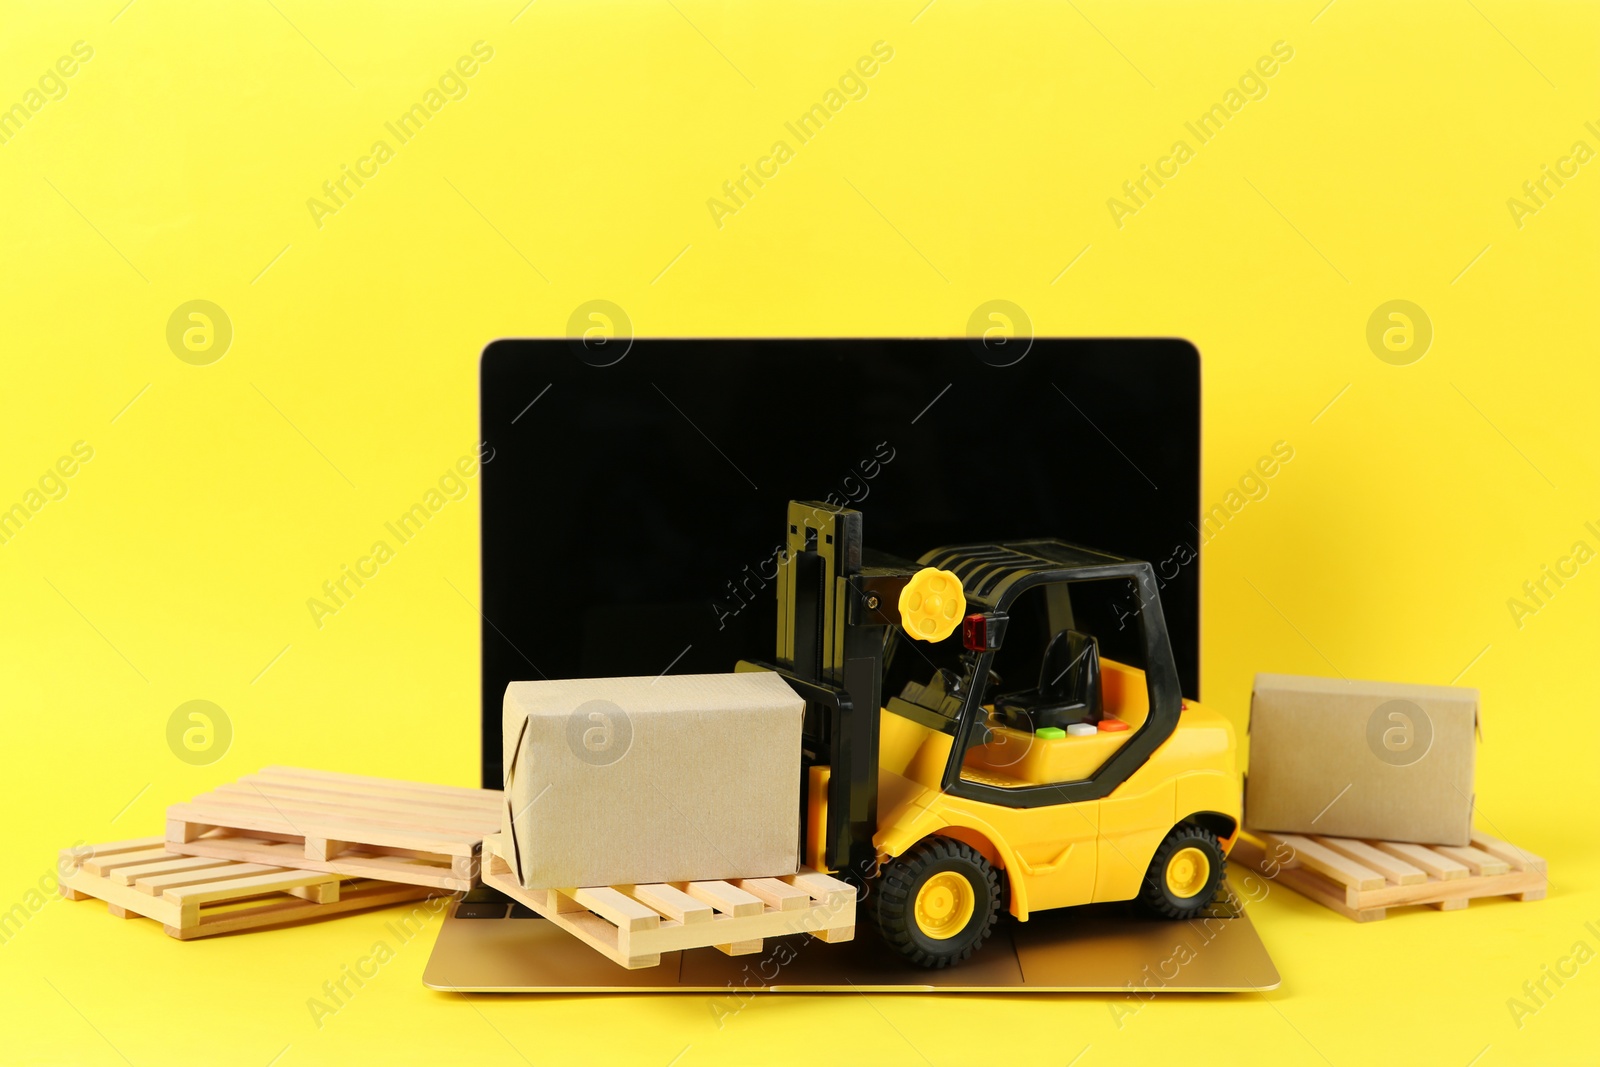 Photo of Laptop, toy forklift with wooden pallets and boxes on yellow background